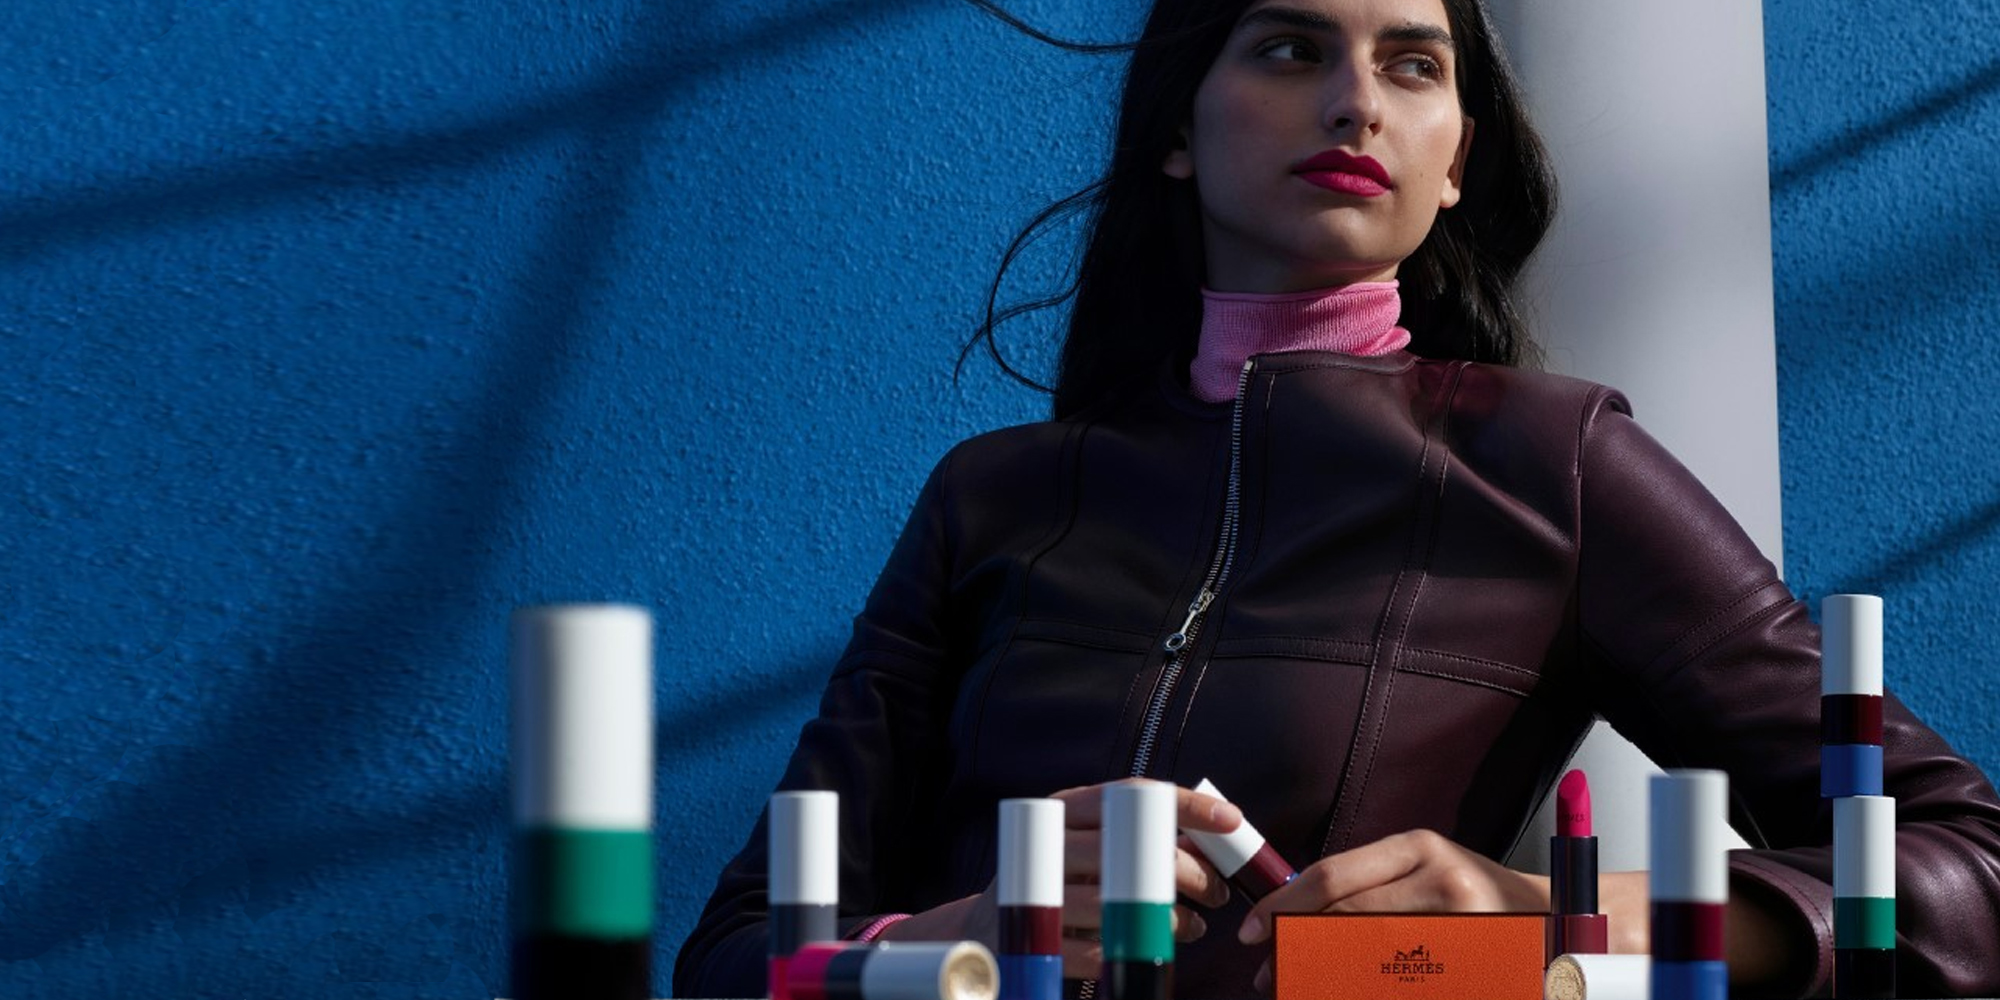 HERMÈS BEAUTY ROUGE HERMÈS FALL 2021 LIMITED EDITION LIPSTICK COLLECTION FILM